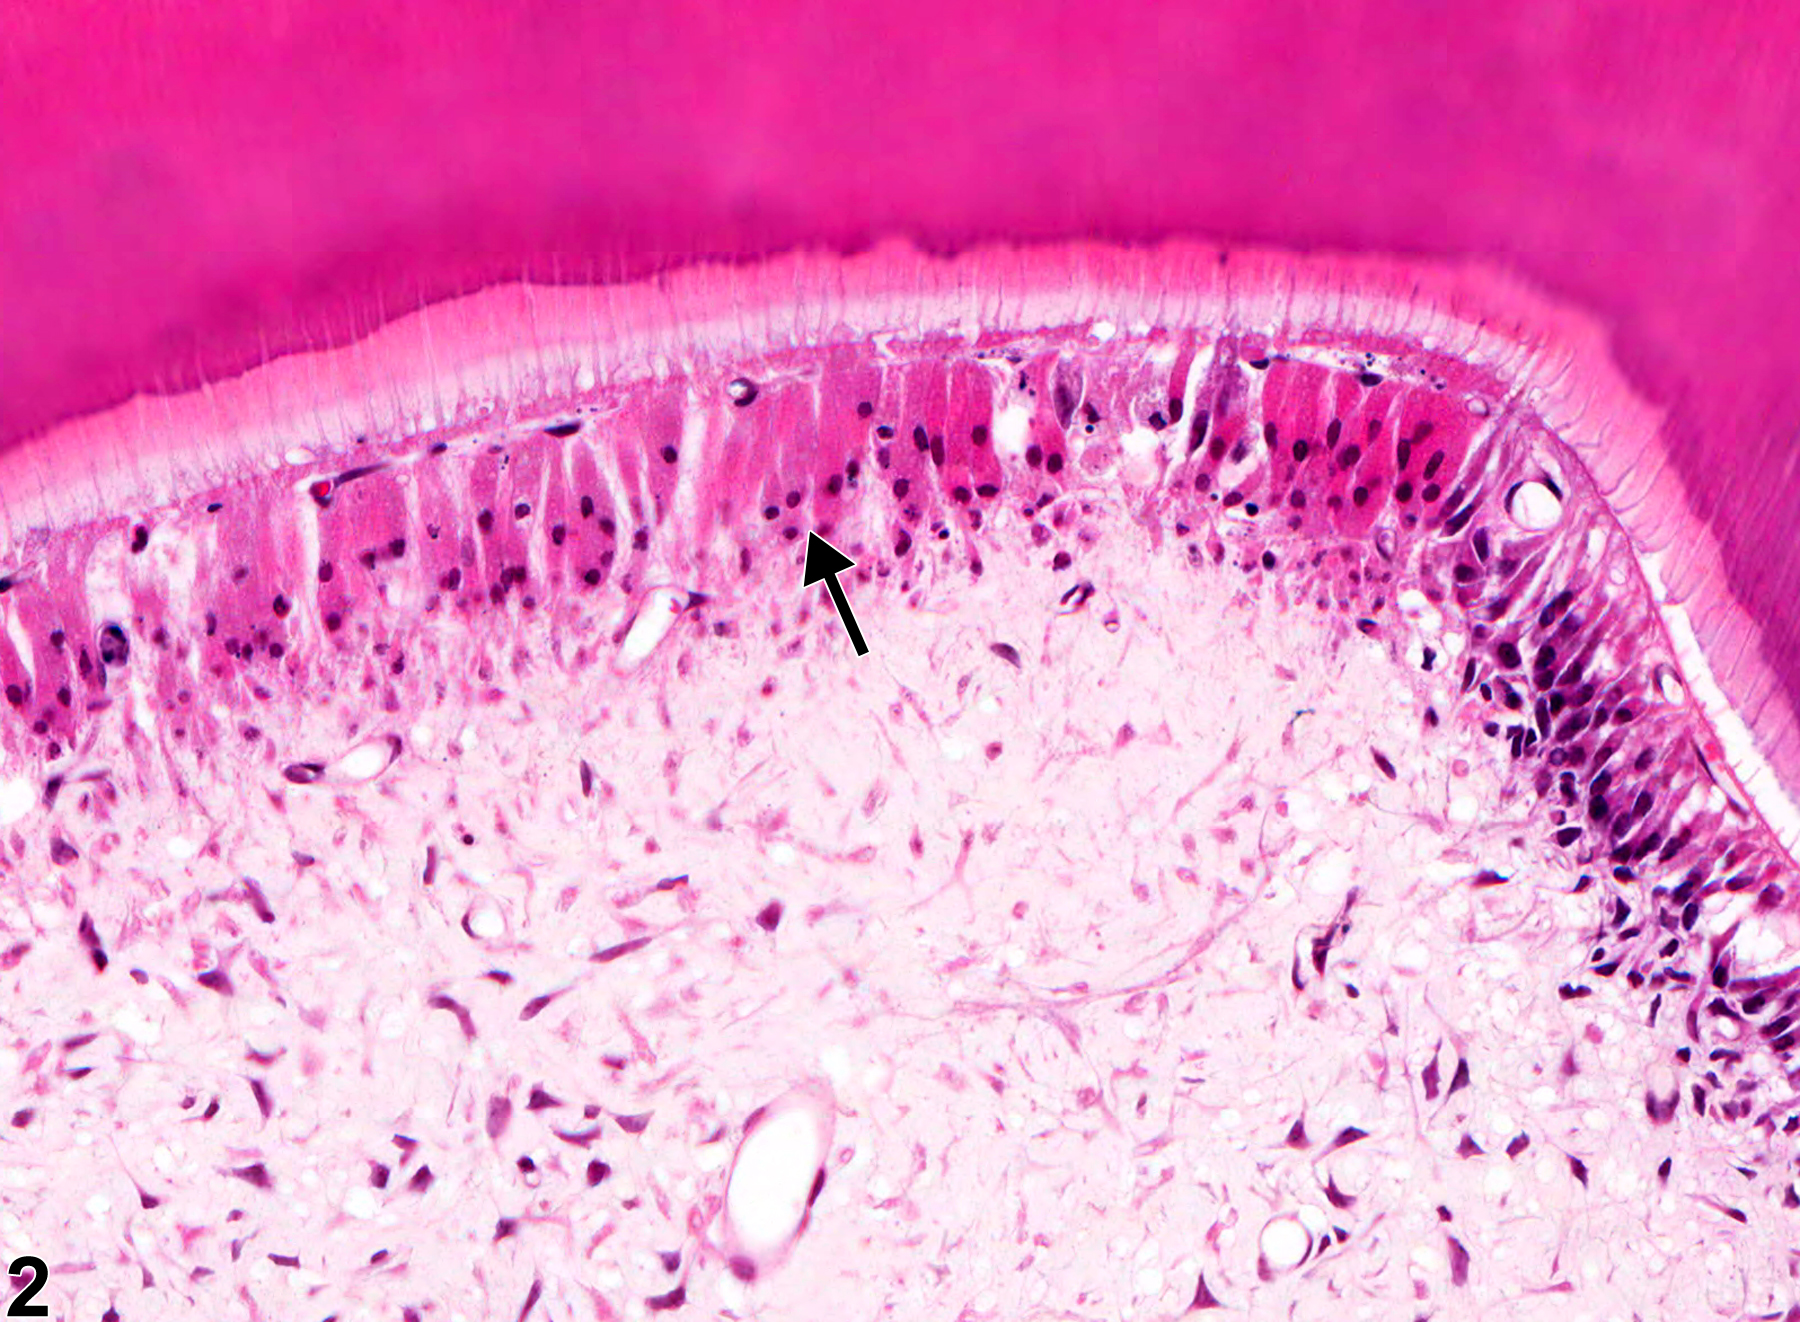 Image of necrosis in the tooth from a female F344/N rat in a subchronic study